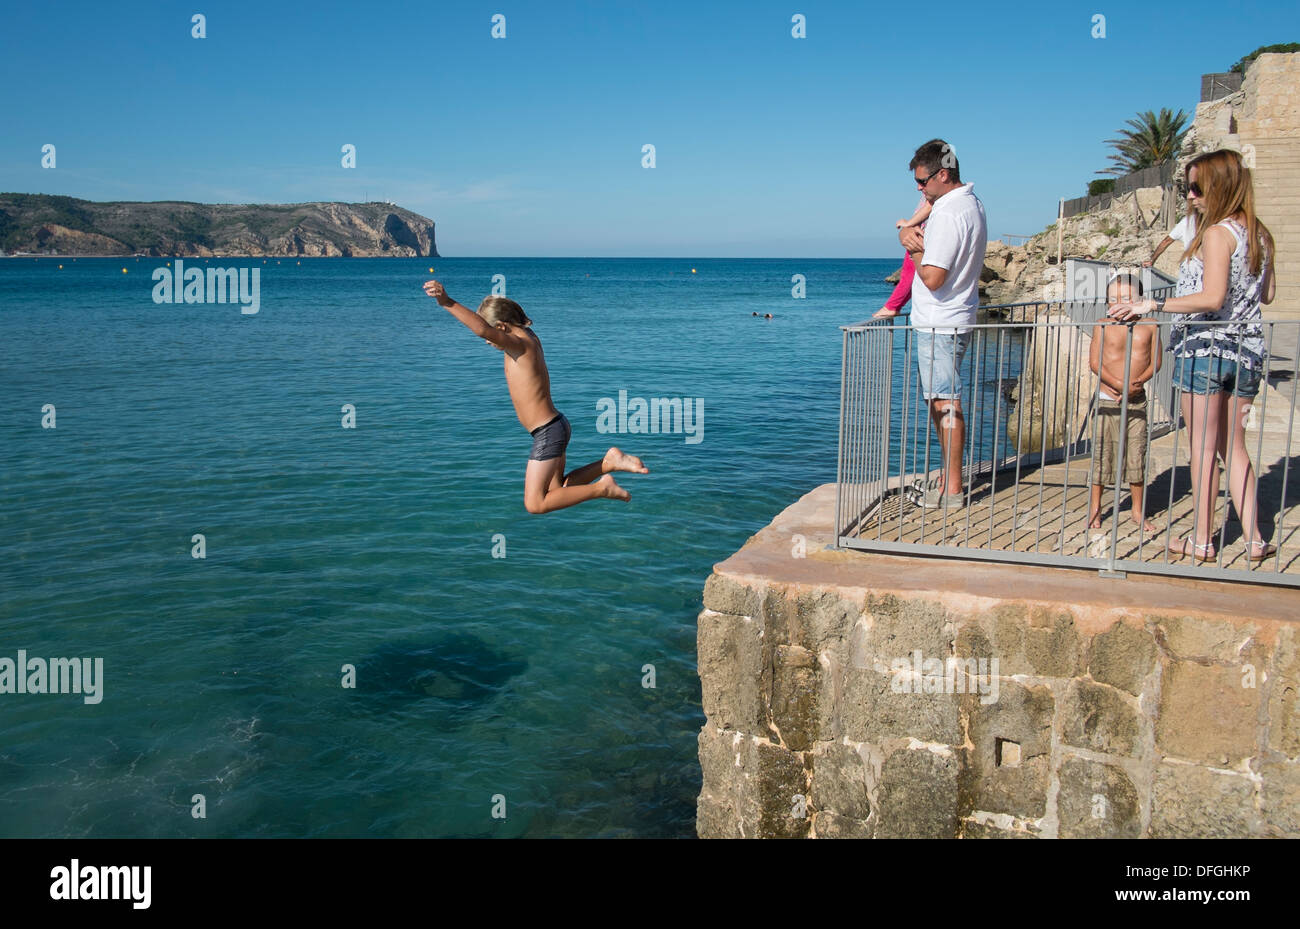 A young boy jumps from a high wall in to the sea in Javea, Spain. Stock Photo